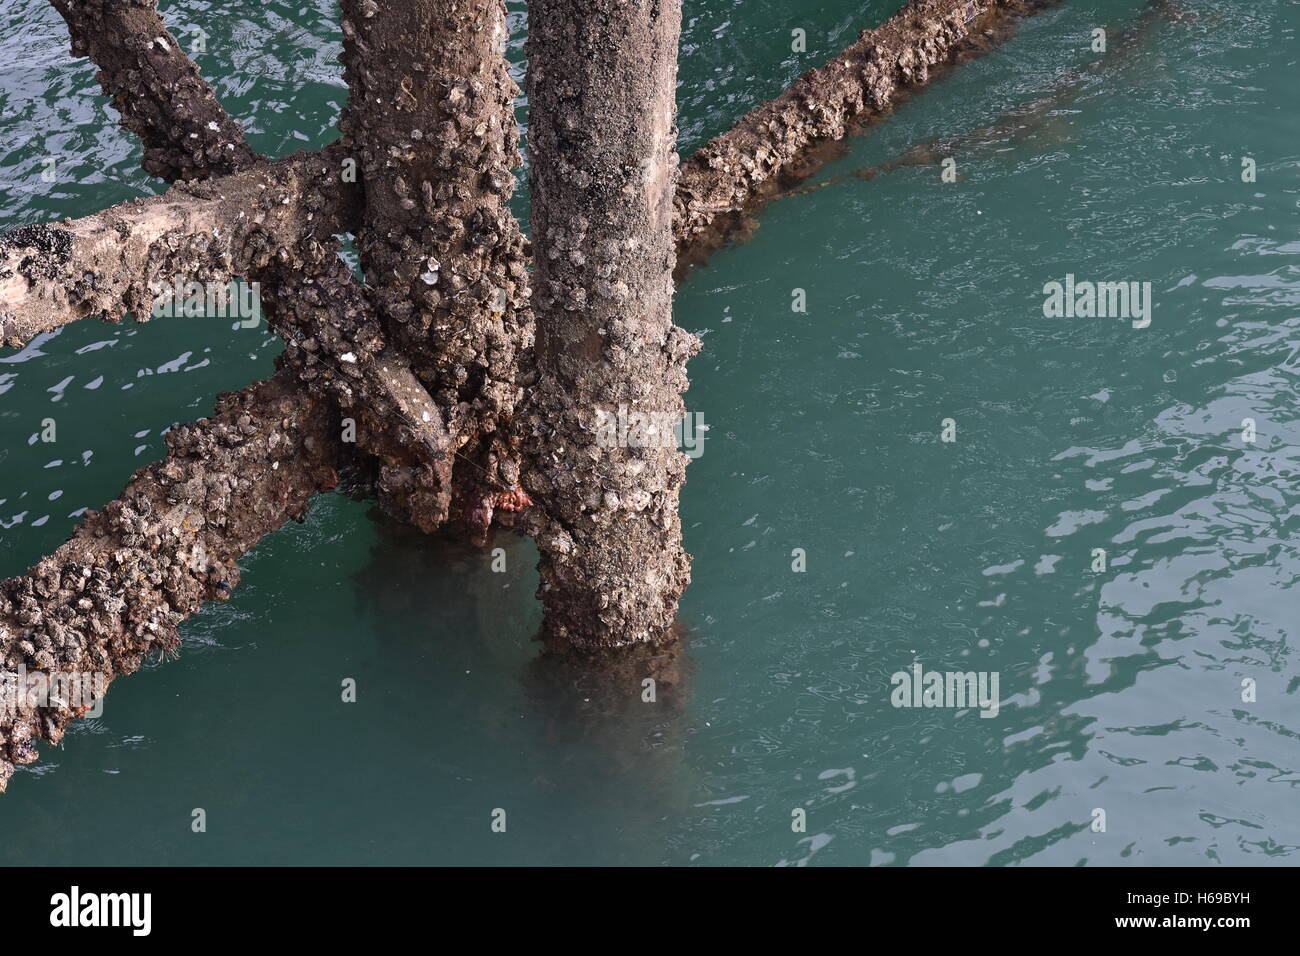 Wooden pier support poles covered with oyster shells Stock Photo